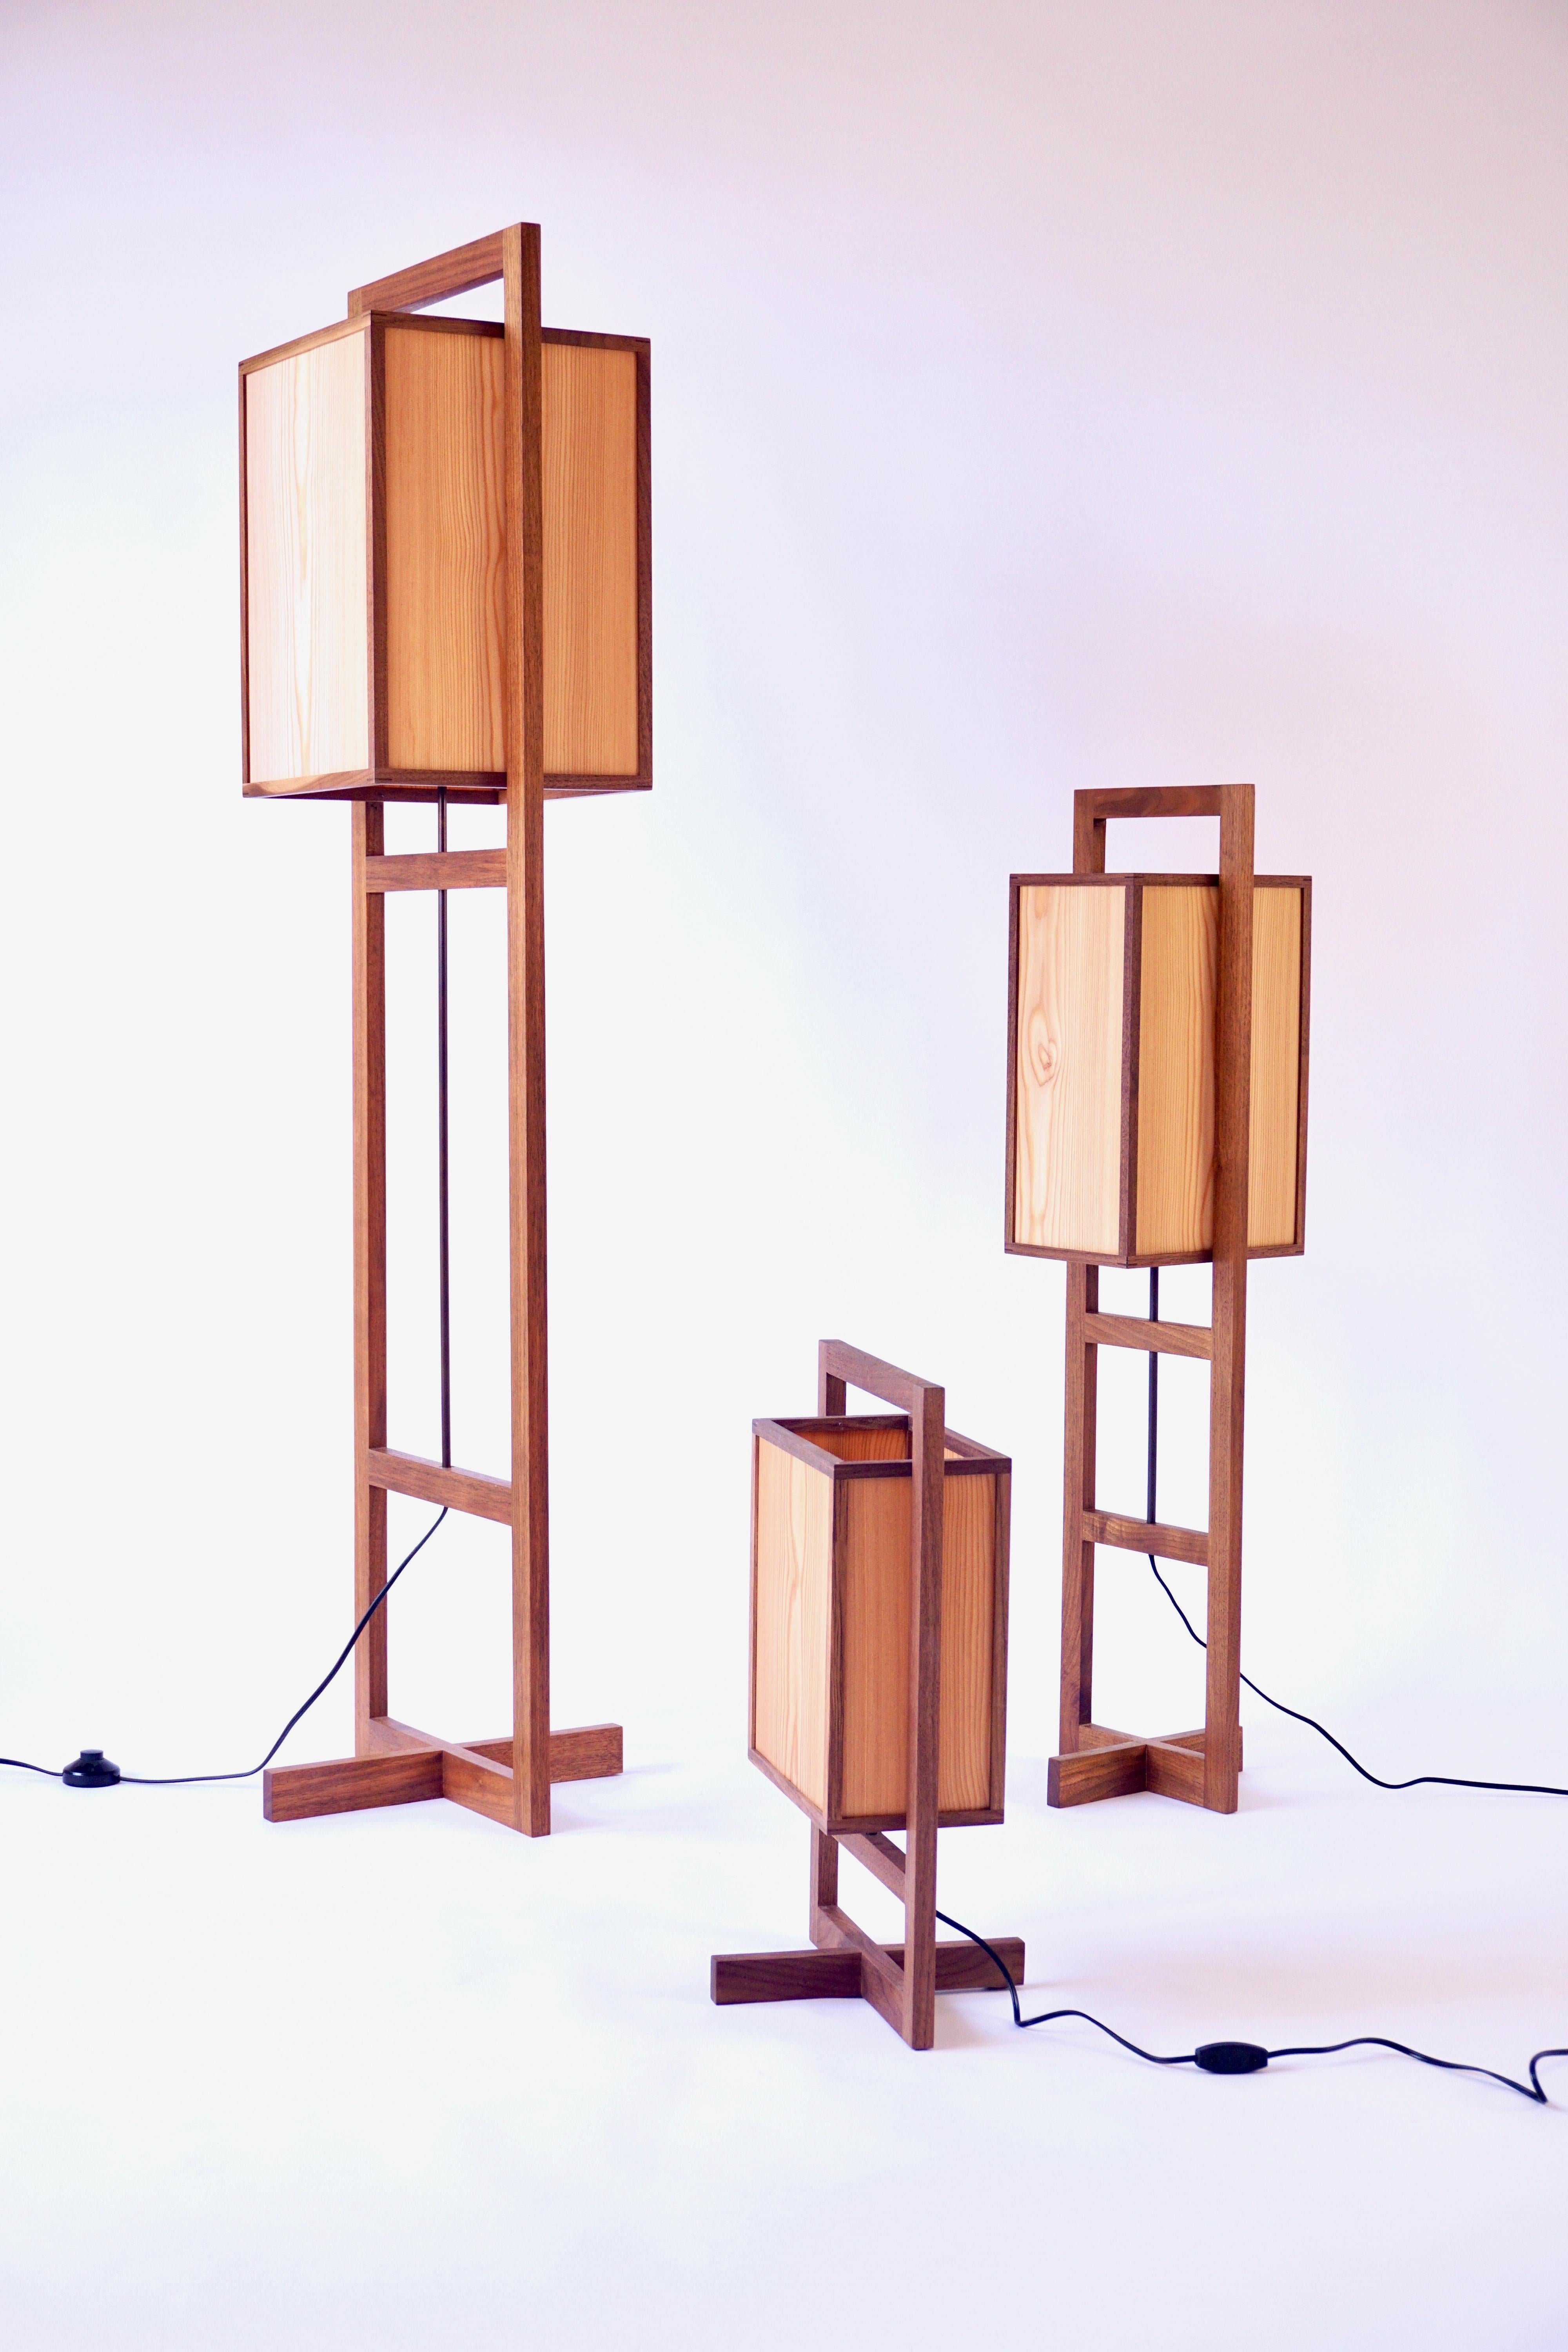 The medium box lamp is one of a group of lamps designed by Chris Lehrecke in 2008. They were influenced by Japanese lanterns, as well as early Frank Lloyd Wright Designs. The lamps are beautifully crafted in Lehrecke's own studio with larch veneers